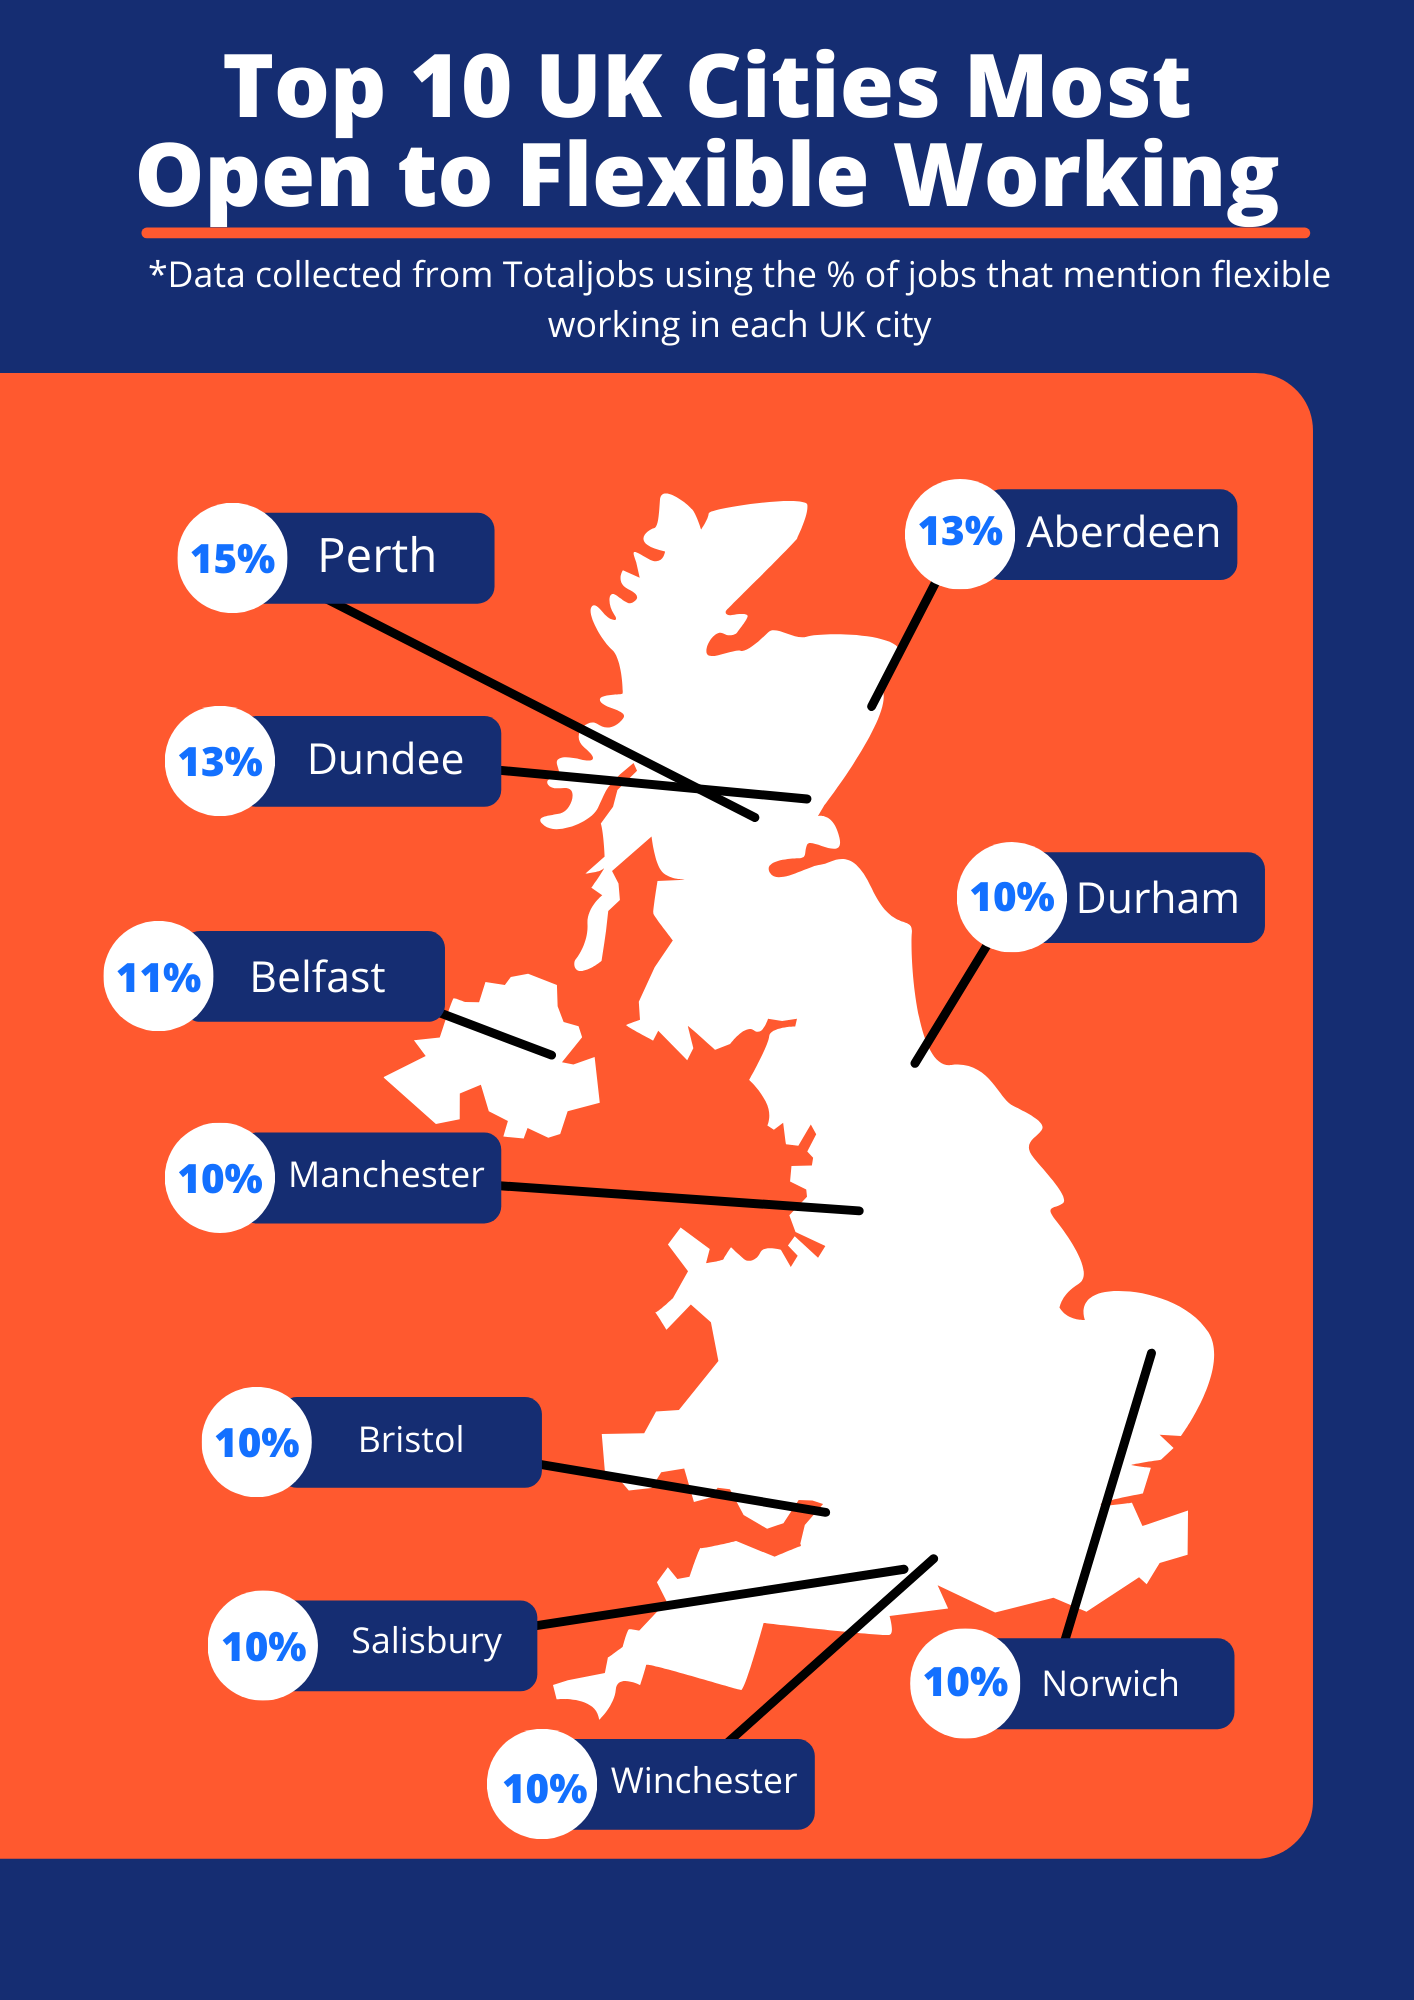 Map of the UK showing the top 10 cities most open to flexible working